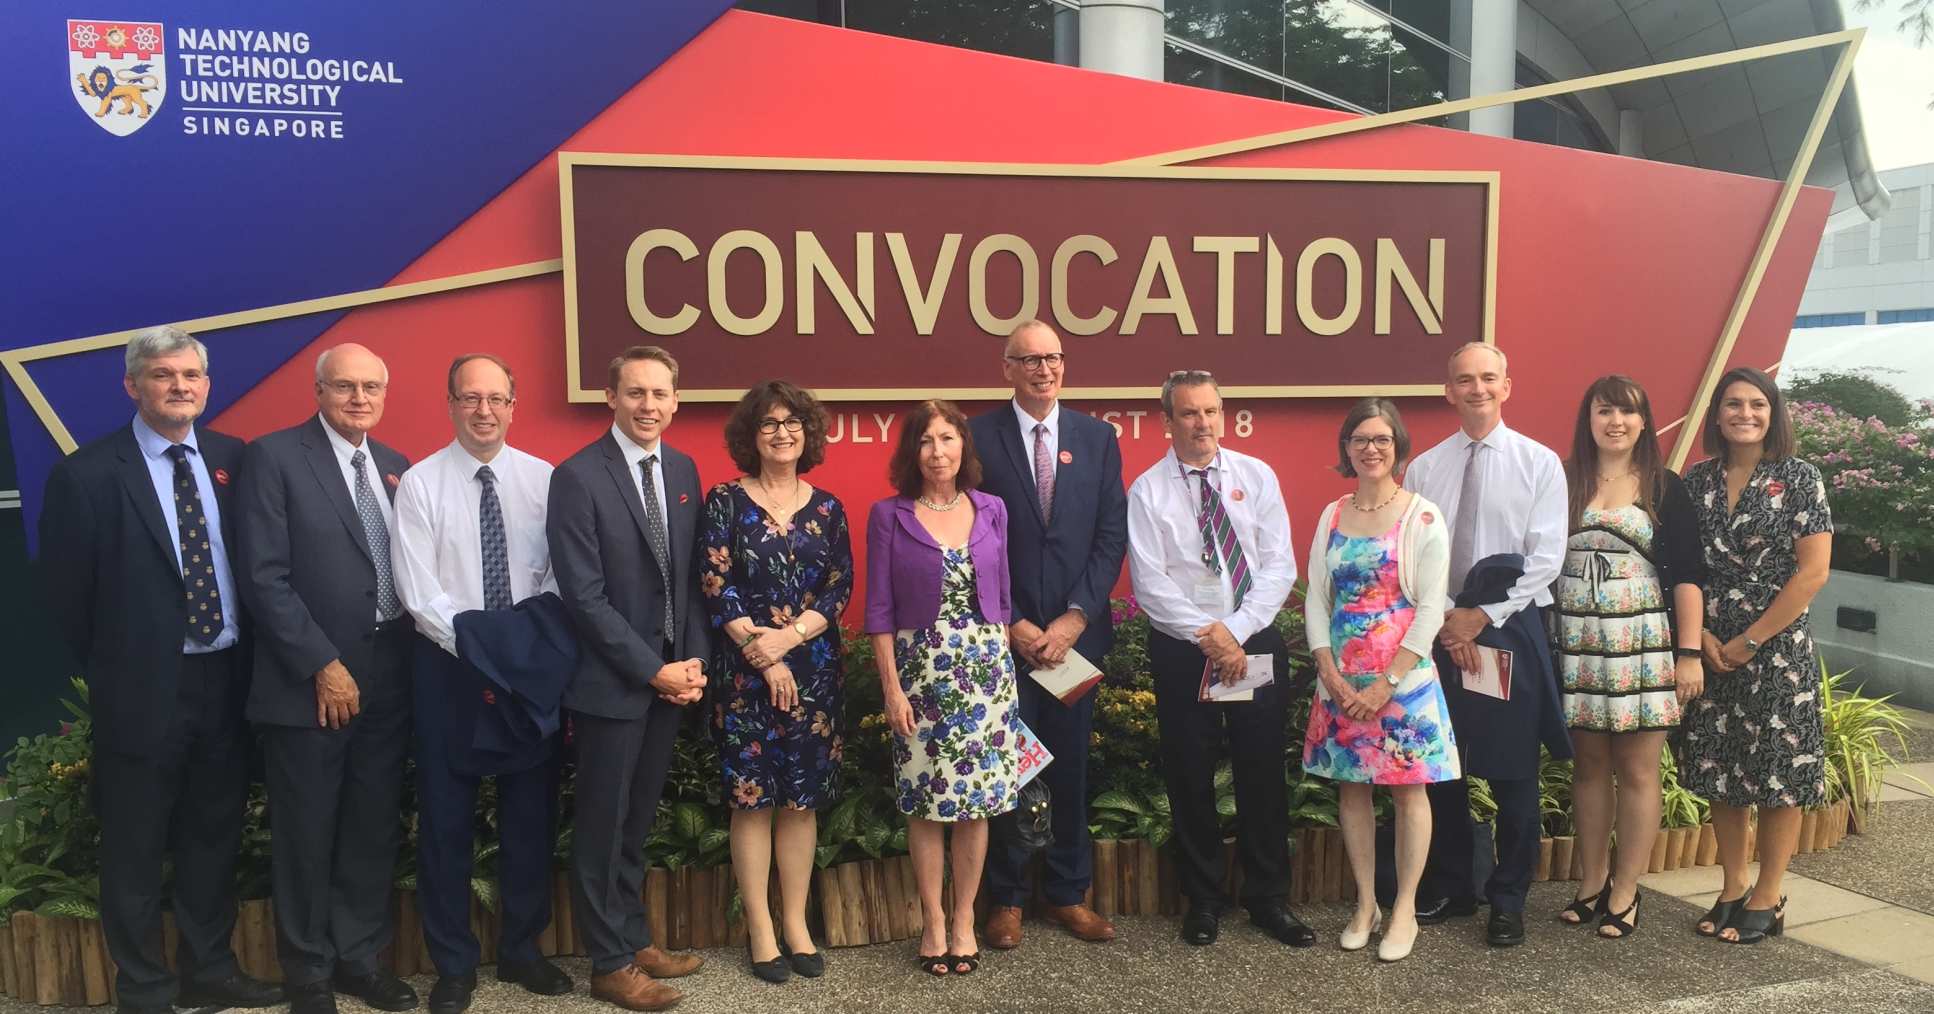 London-based LKCMedicine staff and supporters at the Convocation